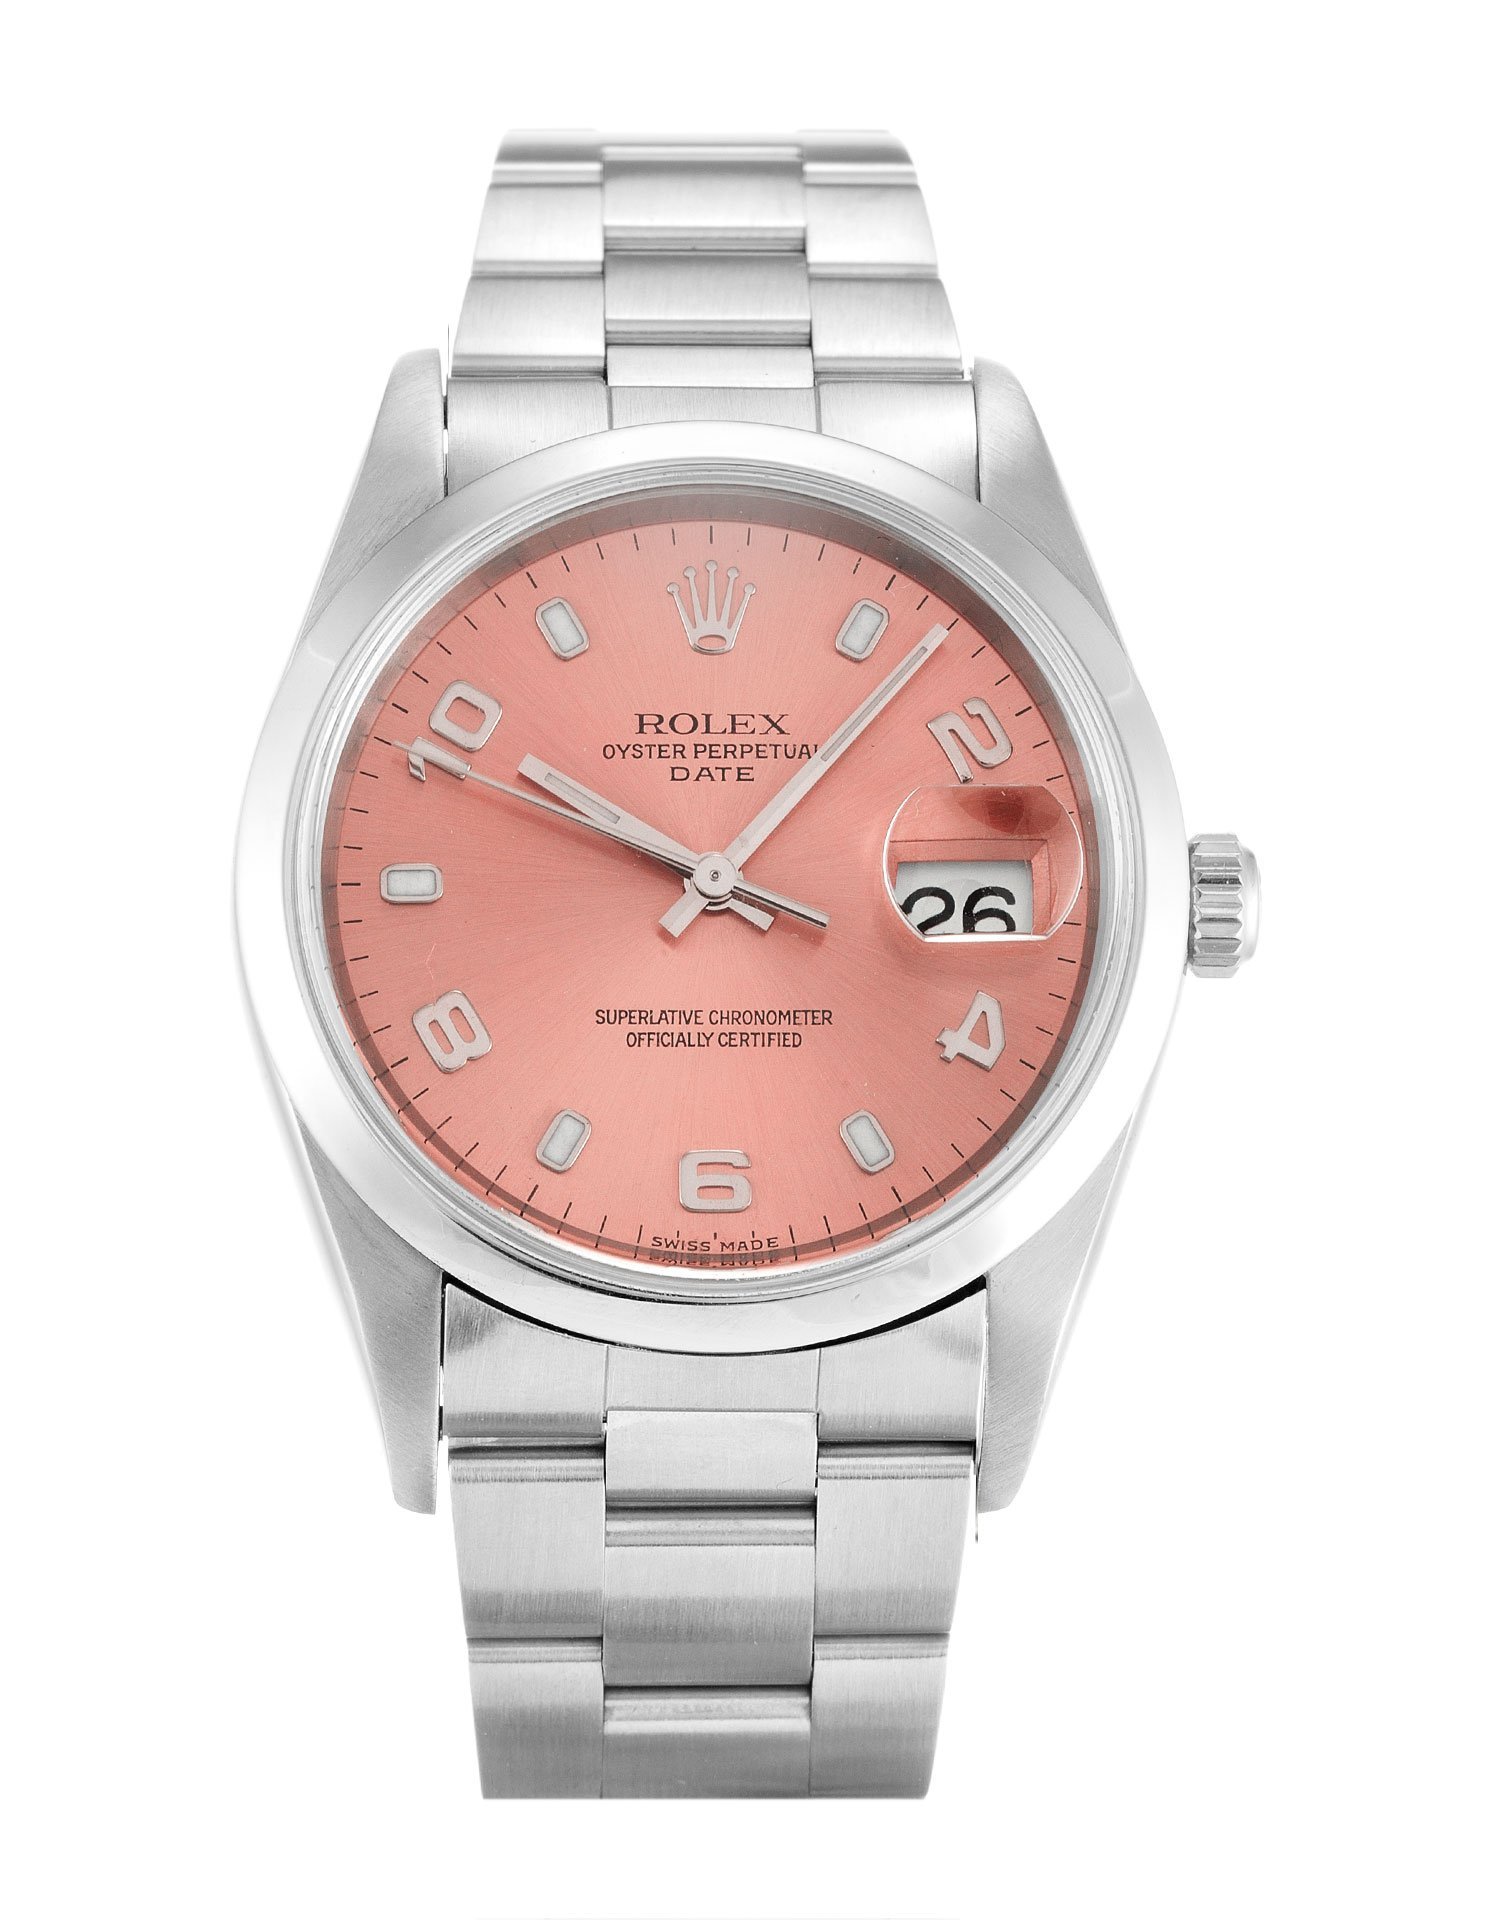 Rolex Oyster Perpetual Date 15200 Género - muchwatches.com